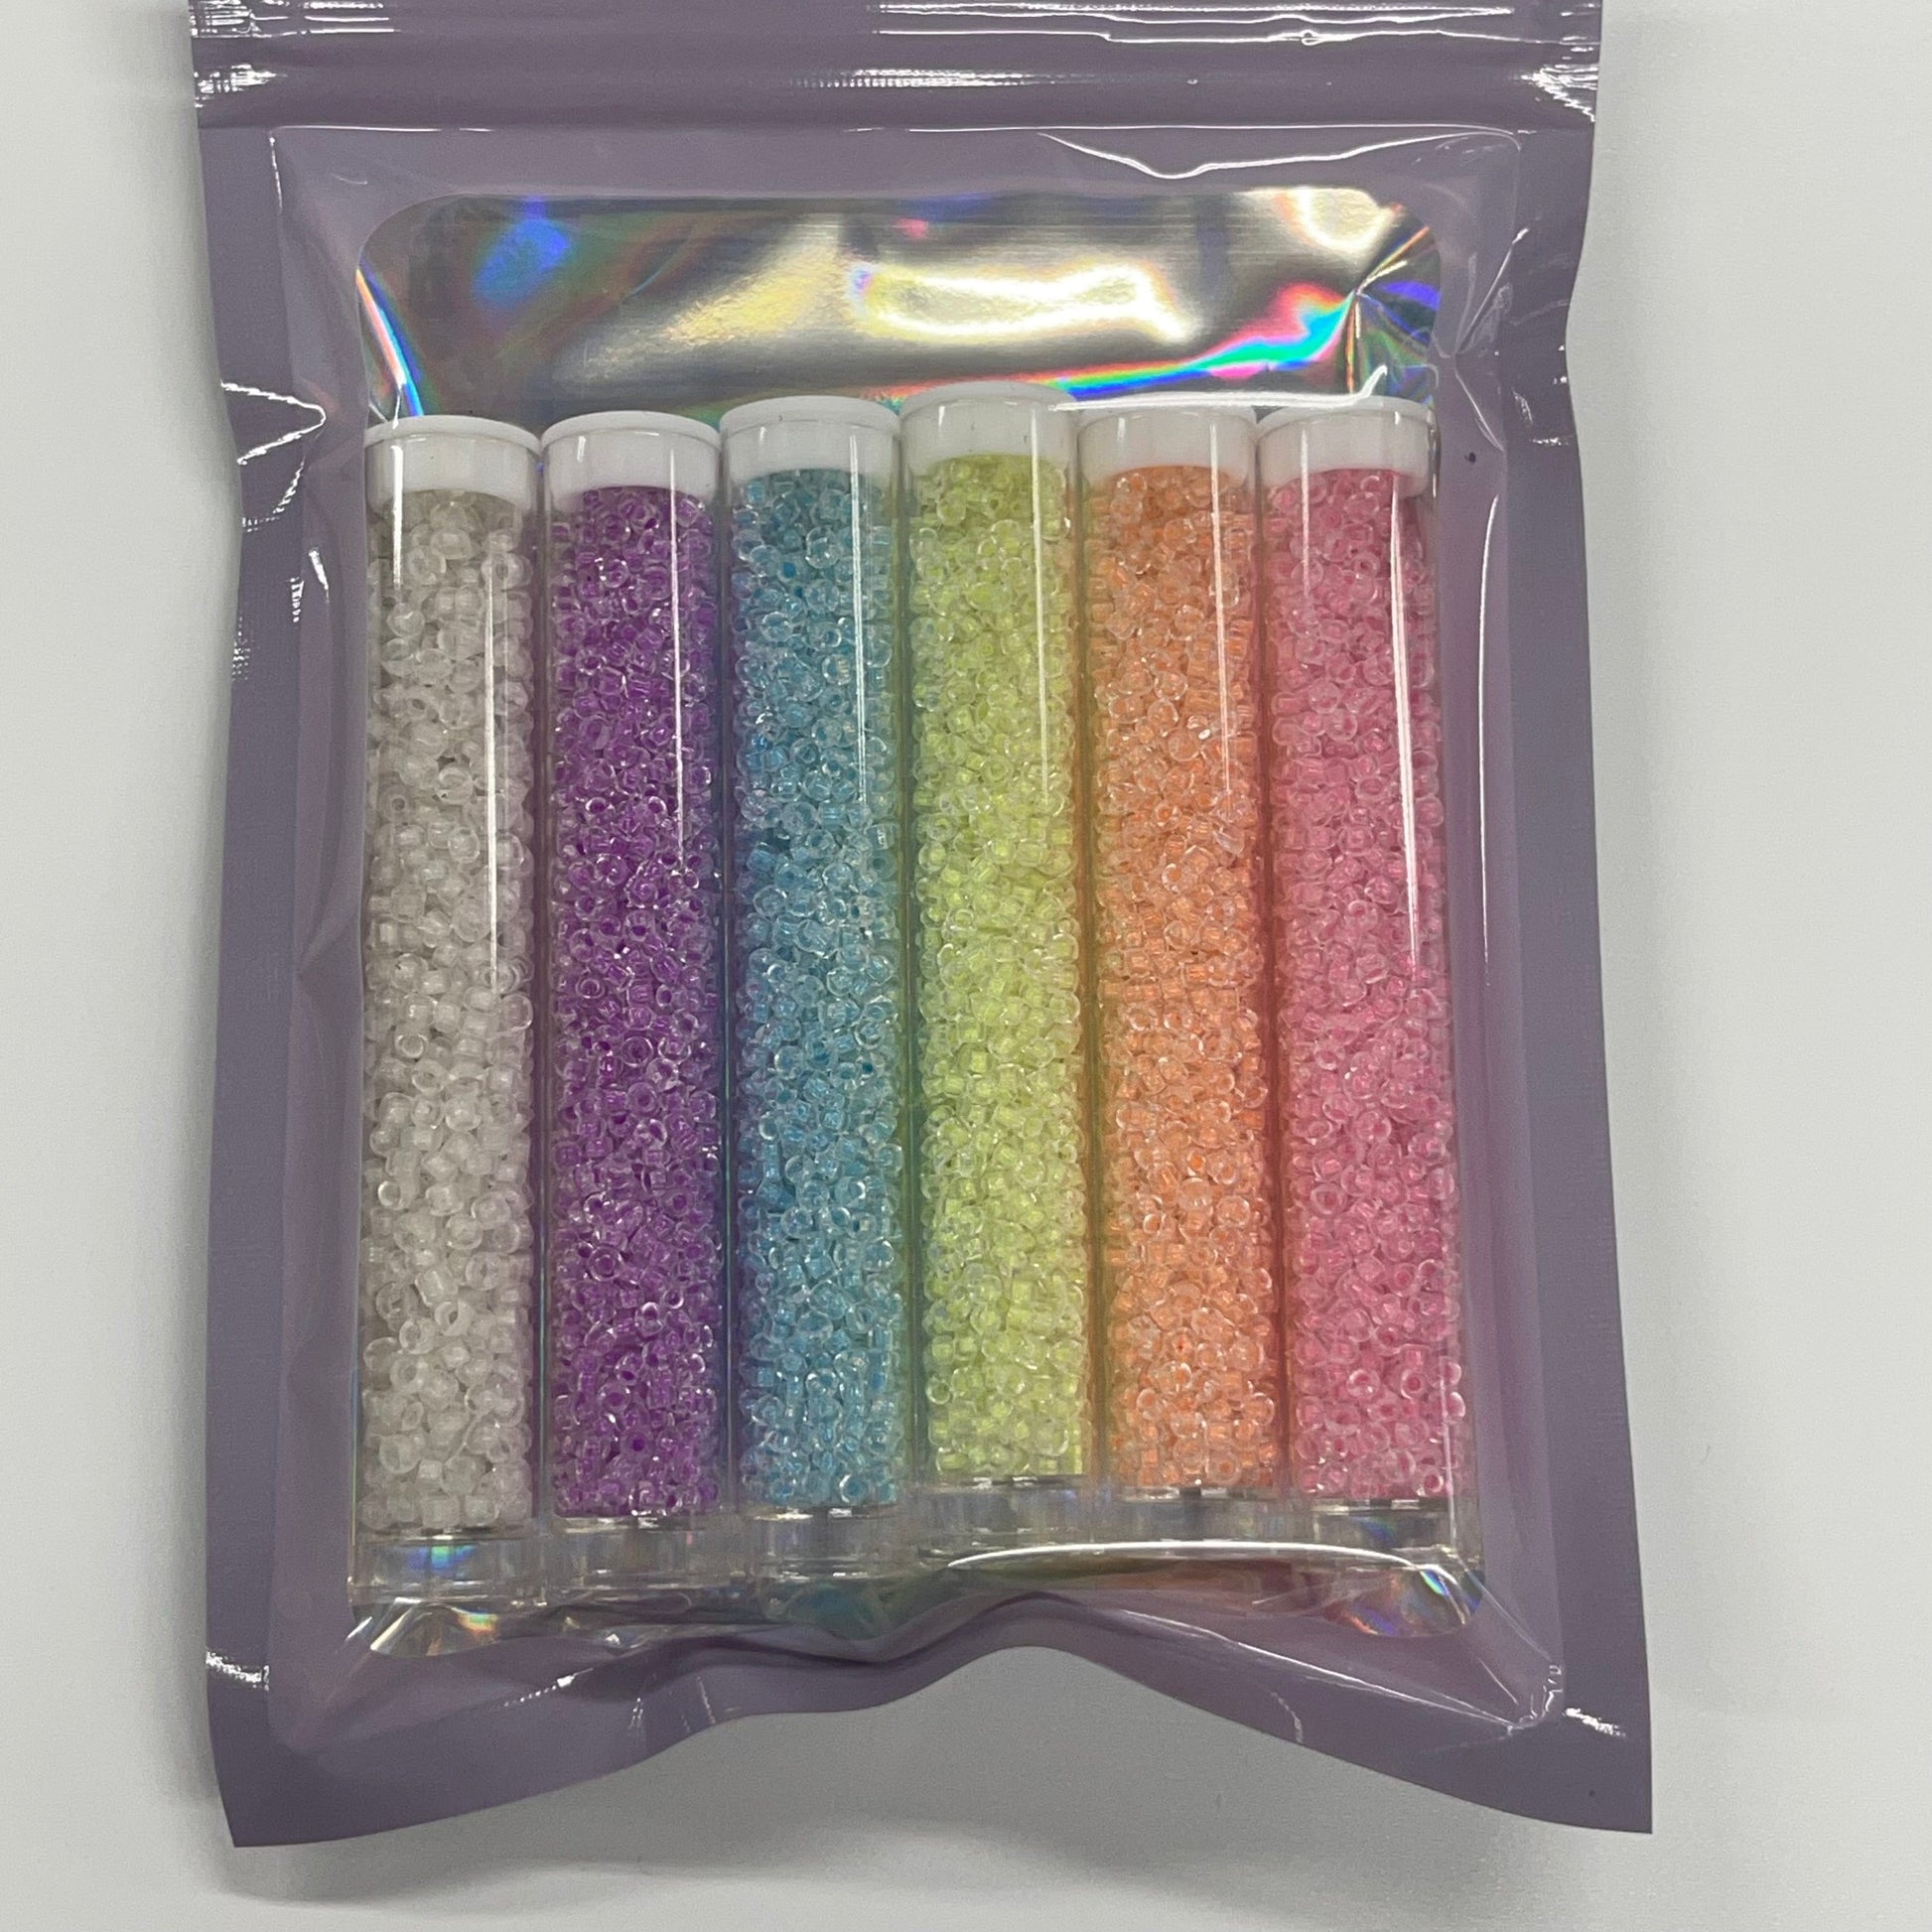 NEON GLOW IN DARK SET, 11/0 Seedbeads in 7g x 6 colours, BLACK FRIDAY PROMO Promotions